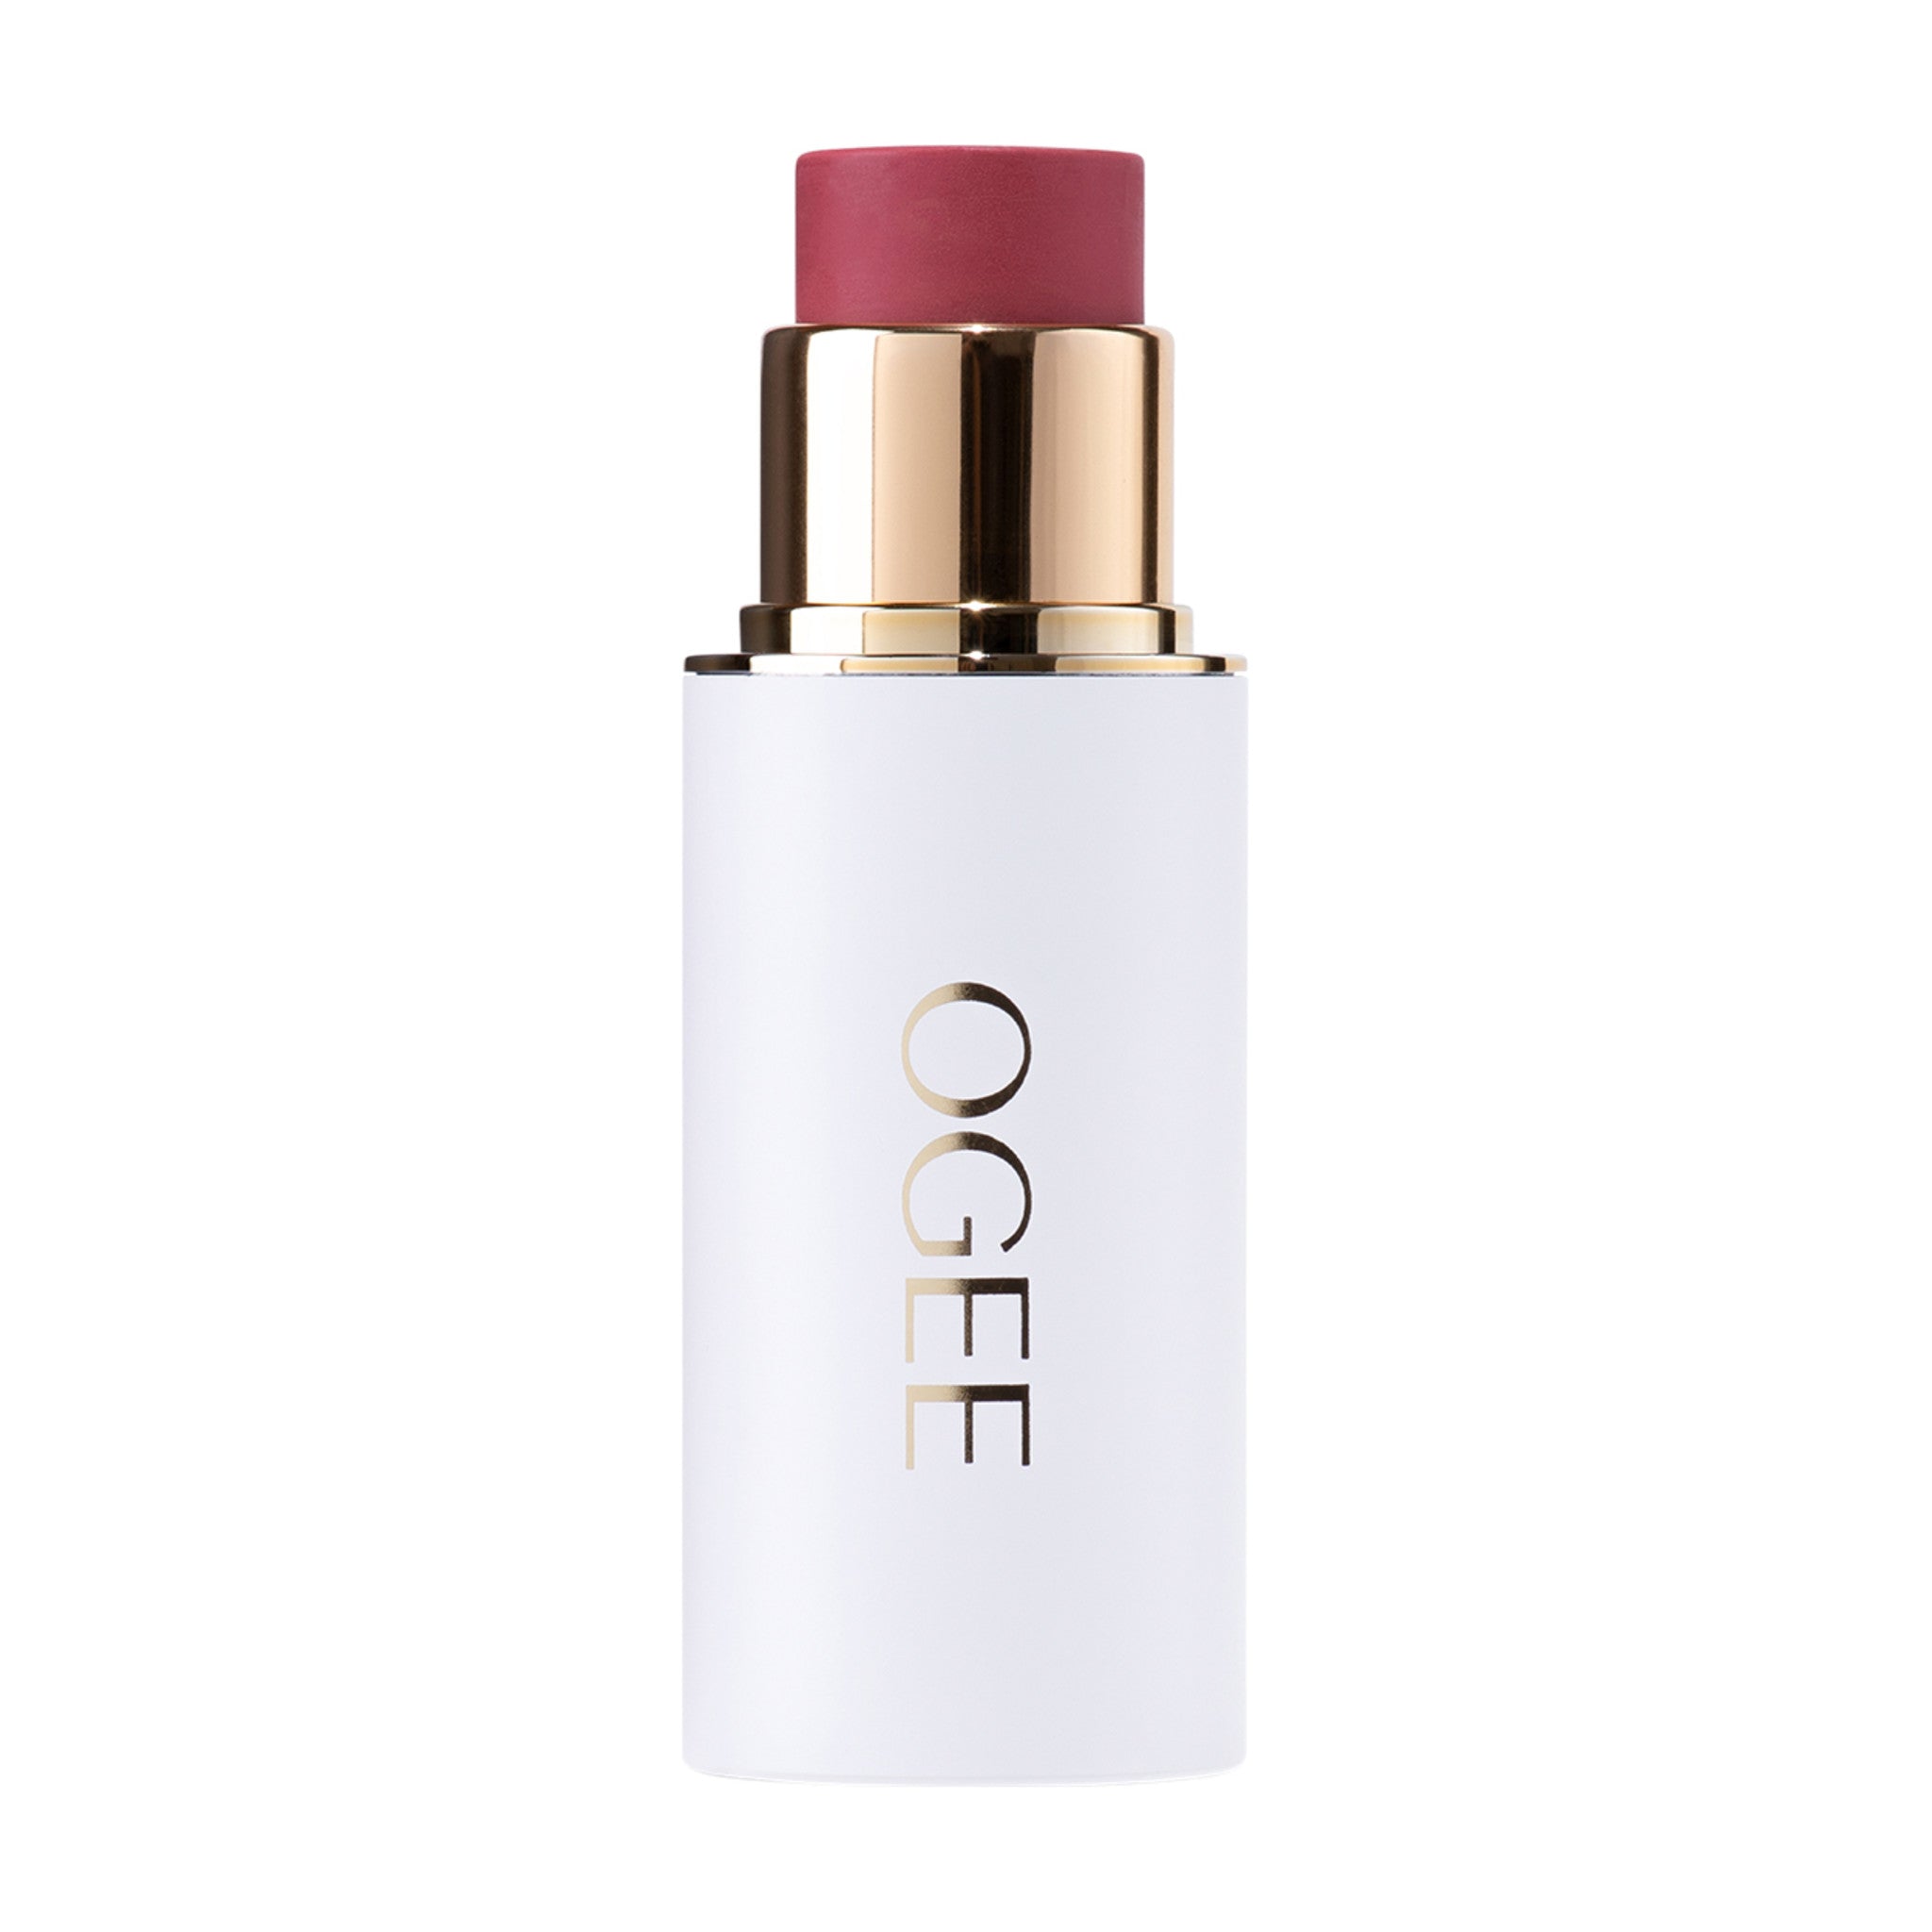 Ogee Sculpted Face Stick Color/Shade variant: Rose Quartz main image. This product is in the color pink